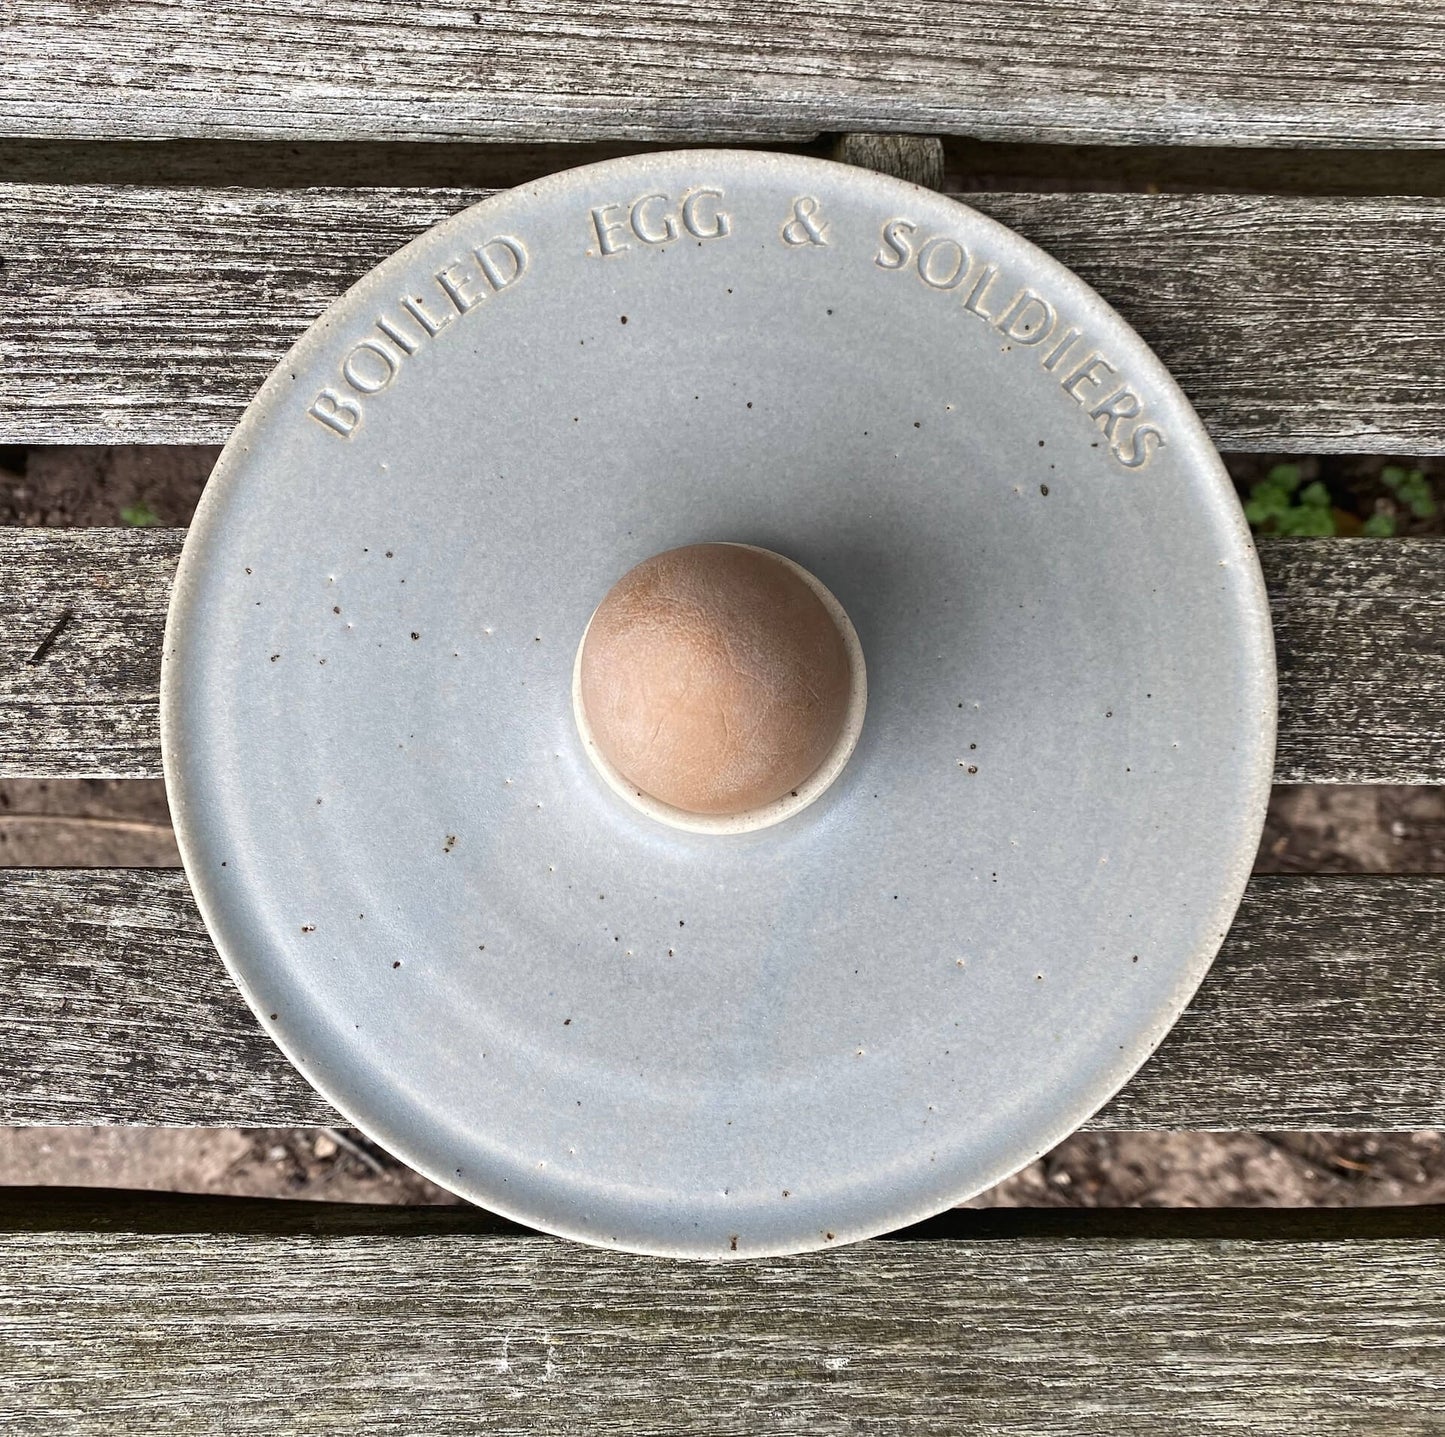 The Village Pottery Satin Grey Boiled Egg & Soldier Plate (various colours)